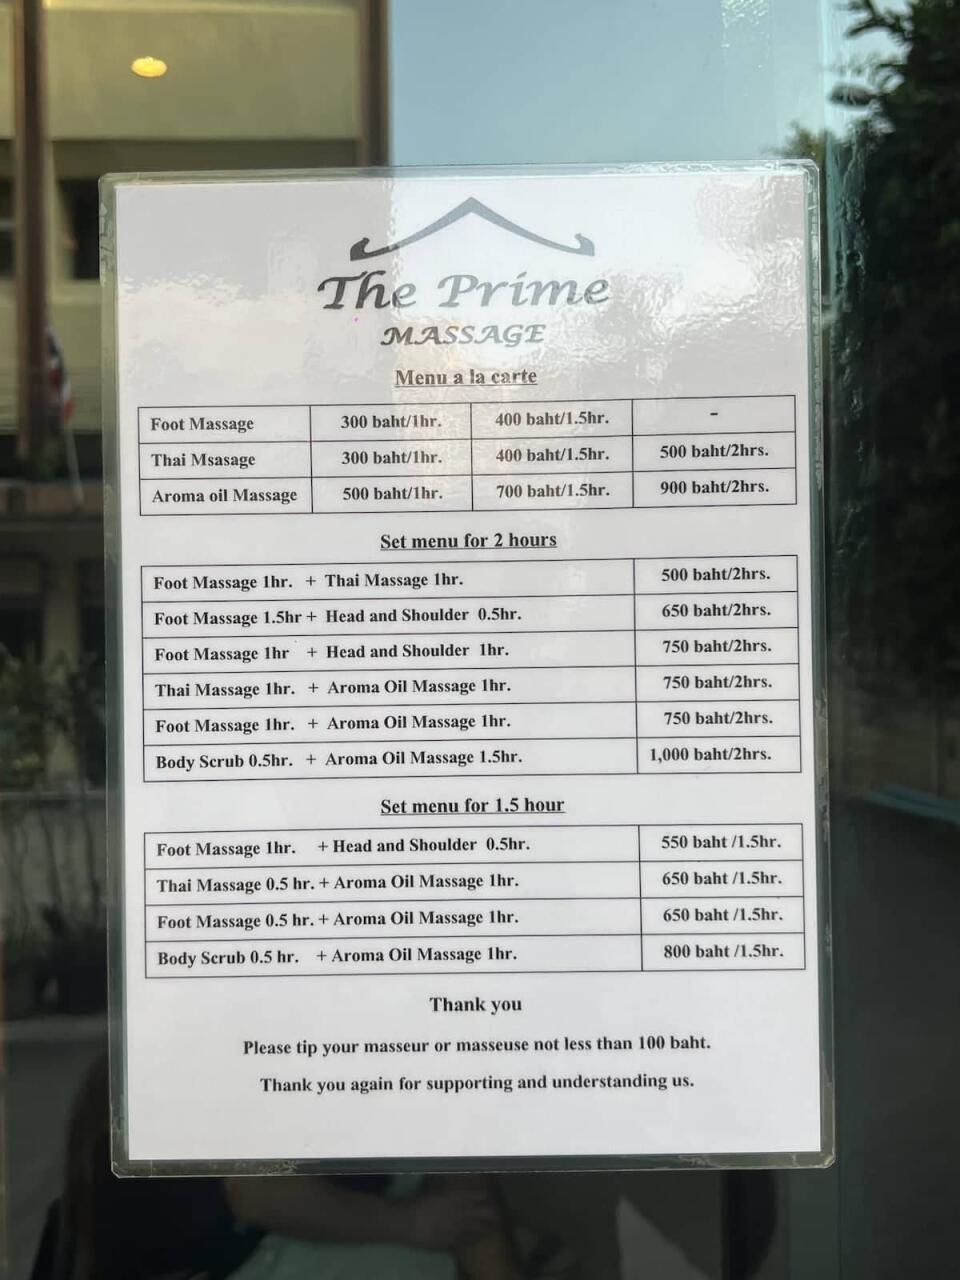 The Prime gay massage parlor's menu of prices.